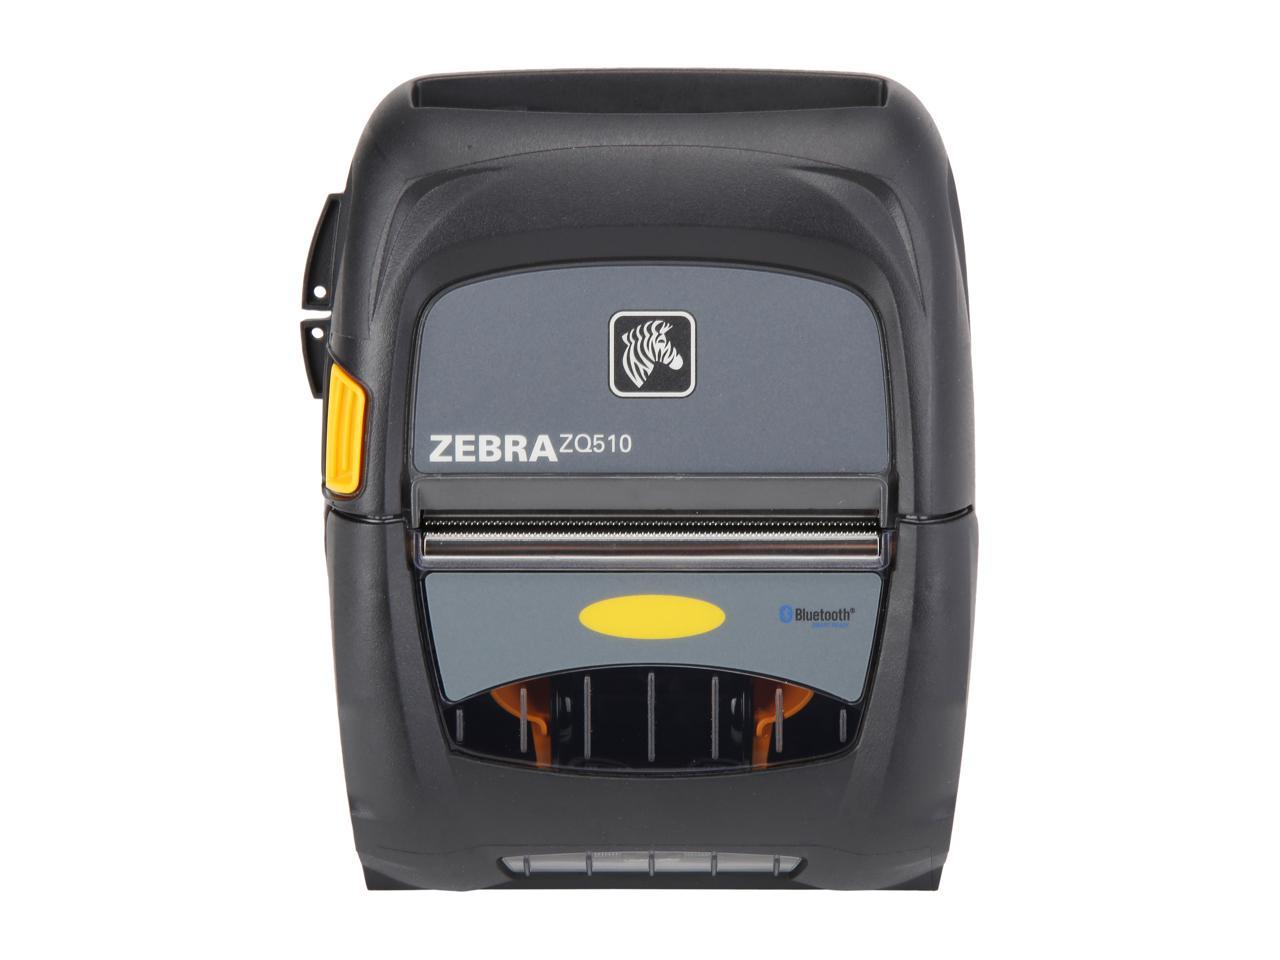 Zebra Zq510 3 Mobile Direct Thermal Receipt And Label Printer 203 Dpi Bluetooth 40 Linered 4068